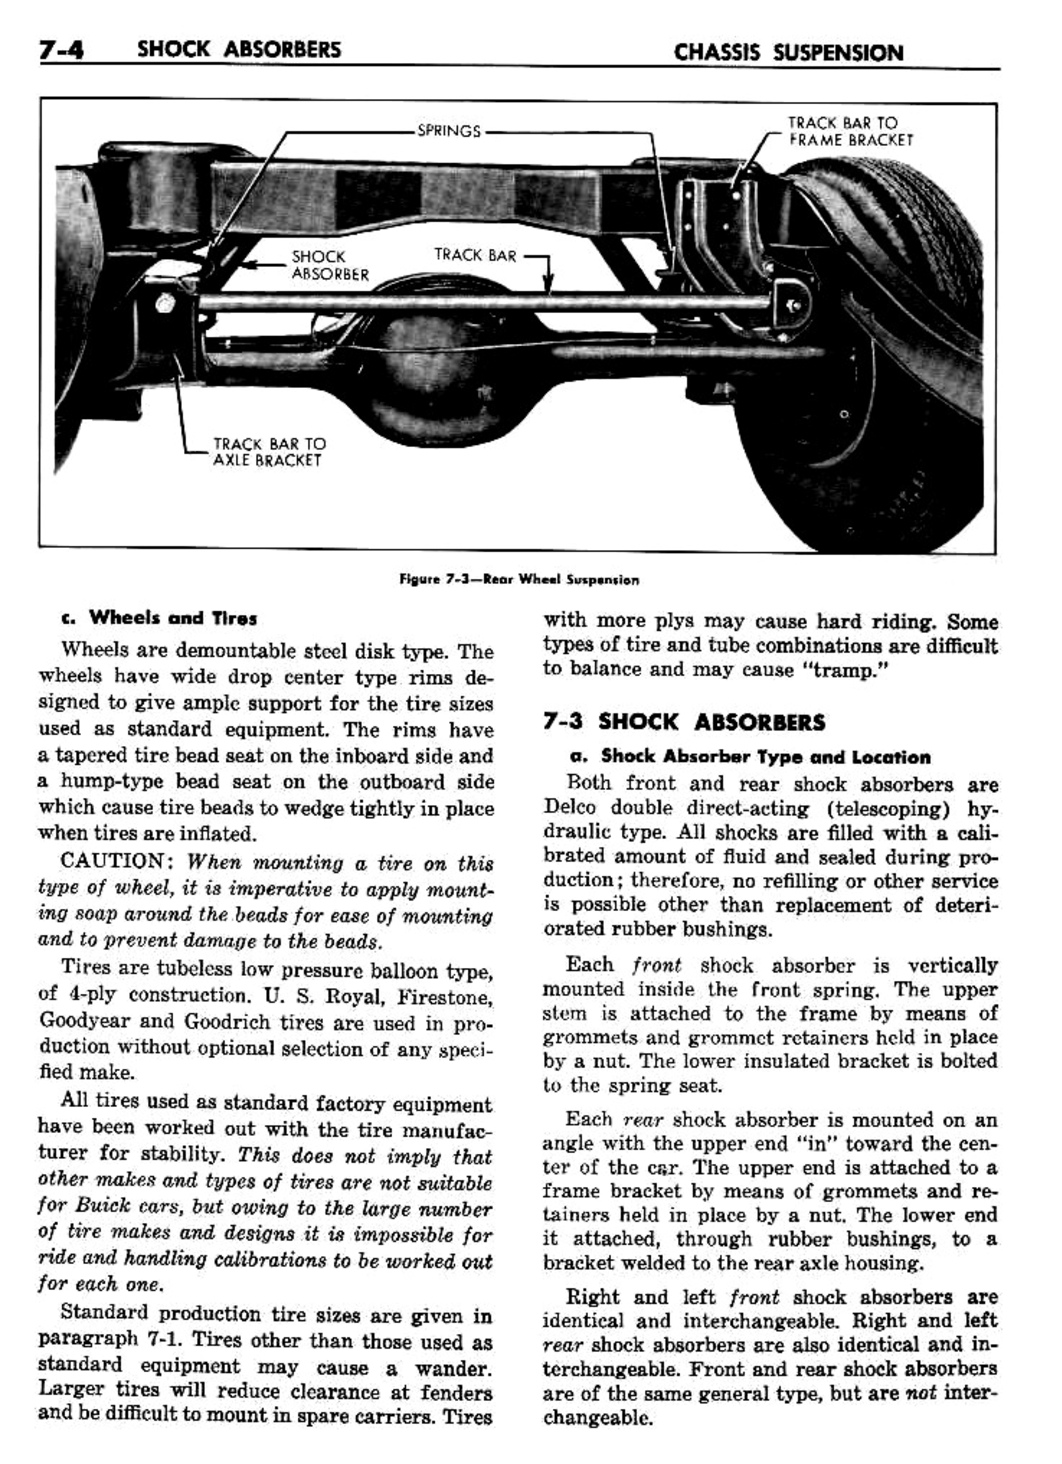 n_08 1960 Buick Shop Manual - Chassis Suspension-004-004.jpg